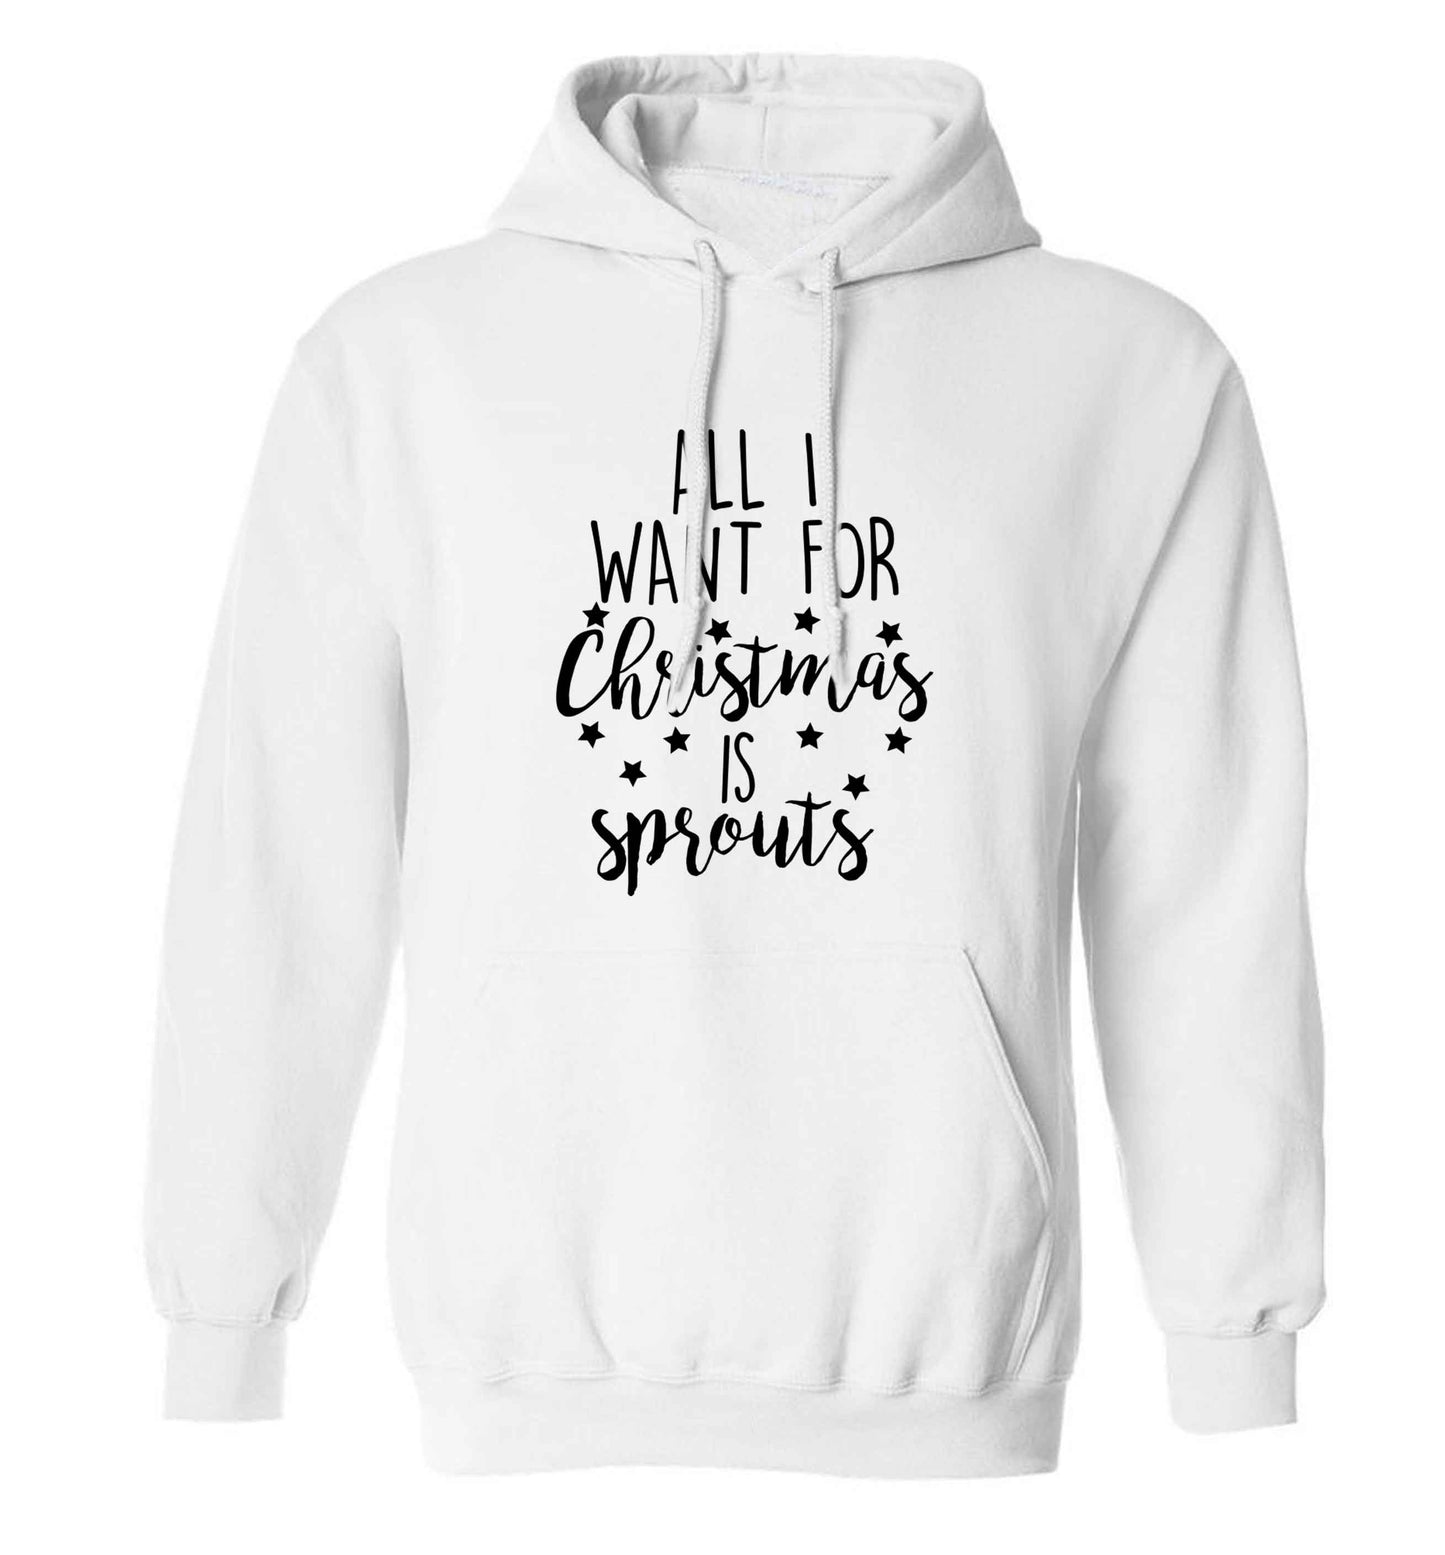 All I want for Christmas is sprouts adults unisex white hoodie 2XL